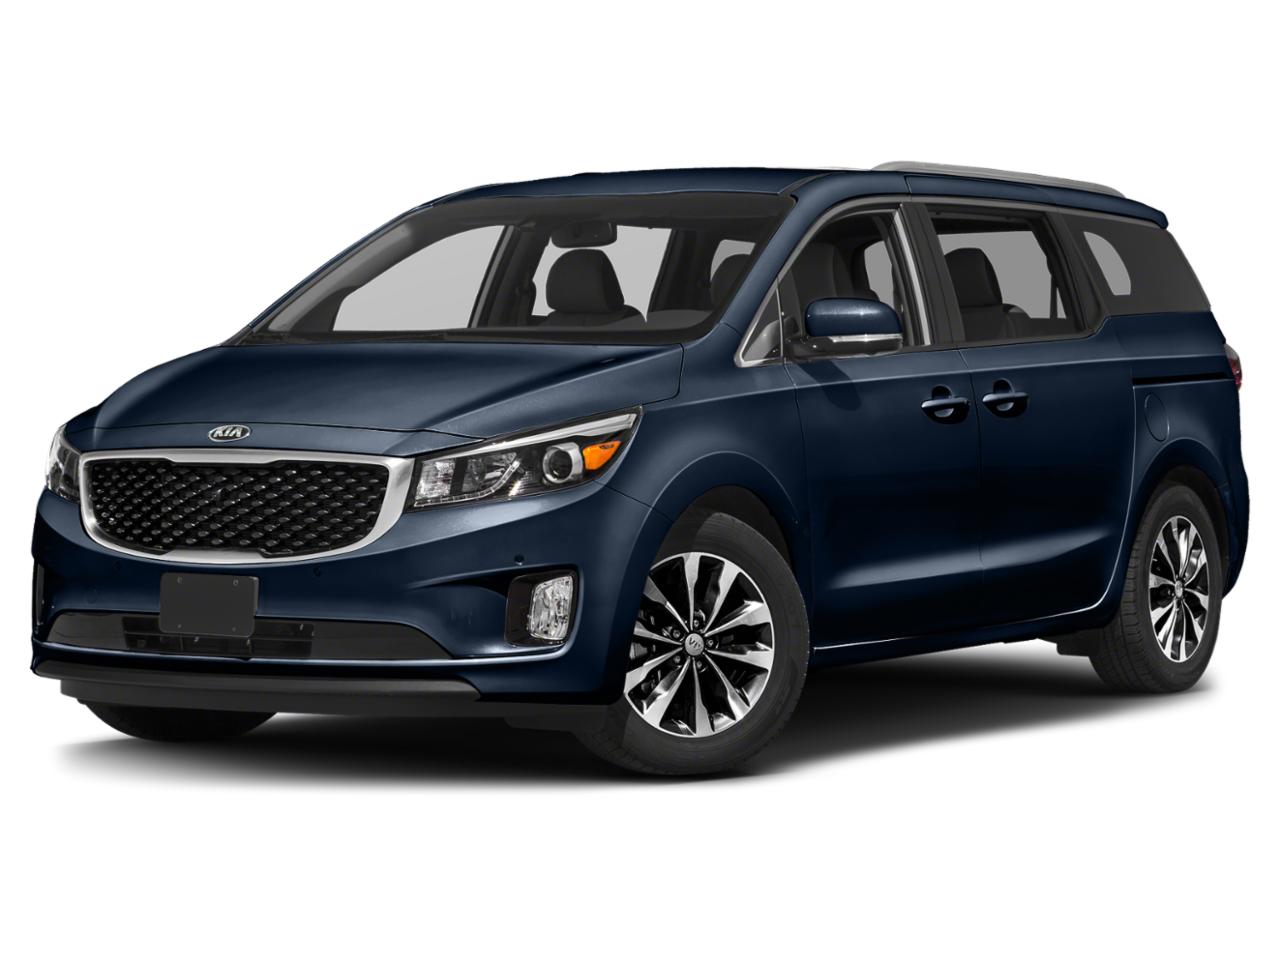 Used Blue 2016 Kia Sedona Van for Sale in INDEPENDENCE, MO - KX4085